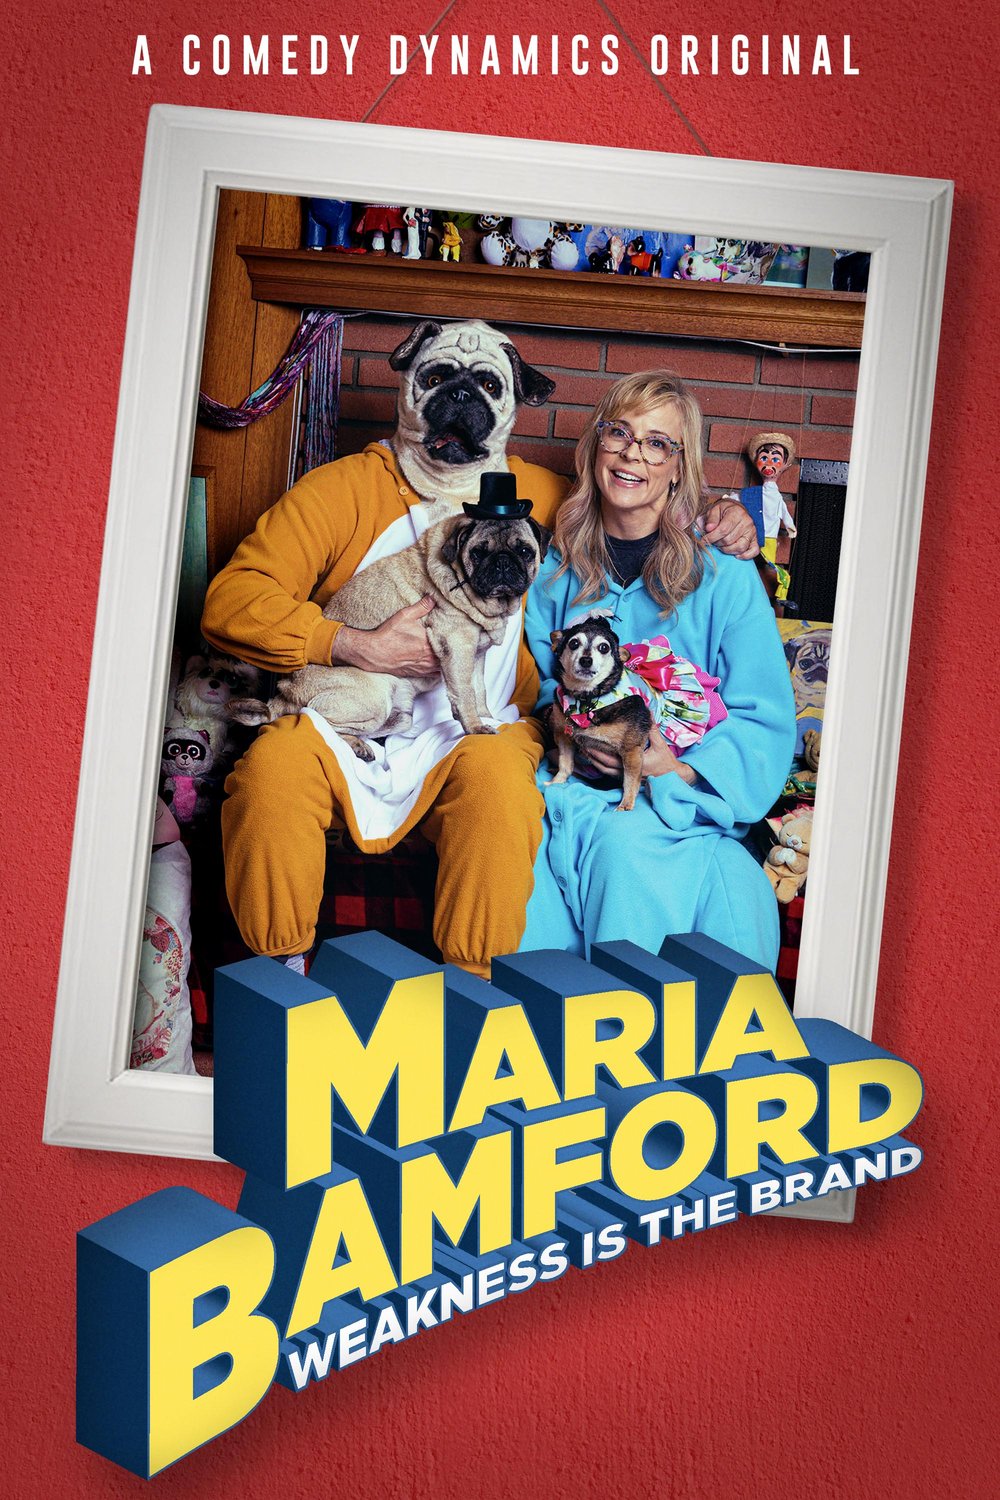 L'affiche du film Maria Bamford: Weakness Is the Brand